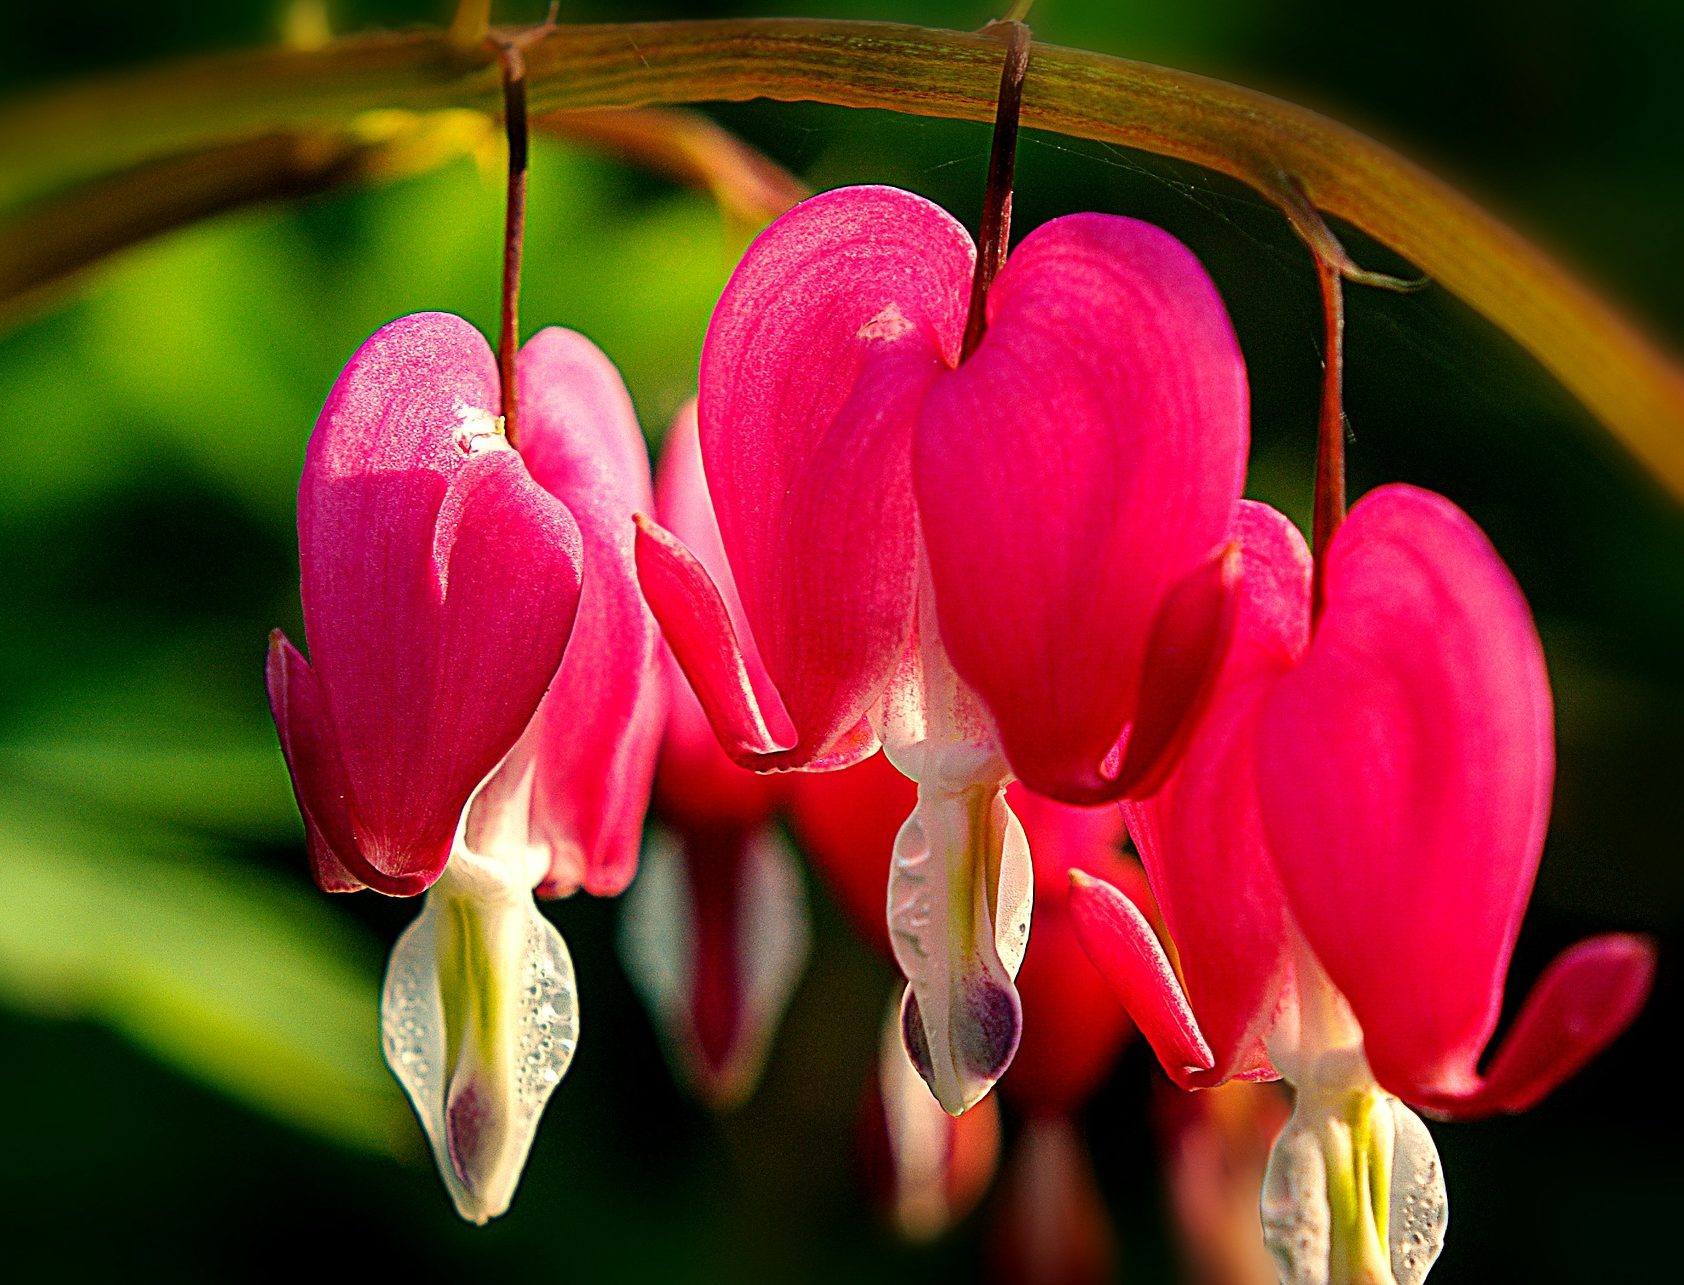 Bleeding heart flowers symbolically hanging from a branch.